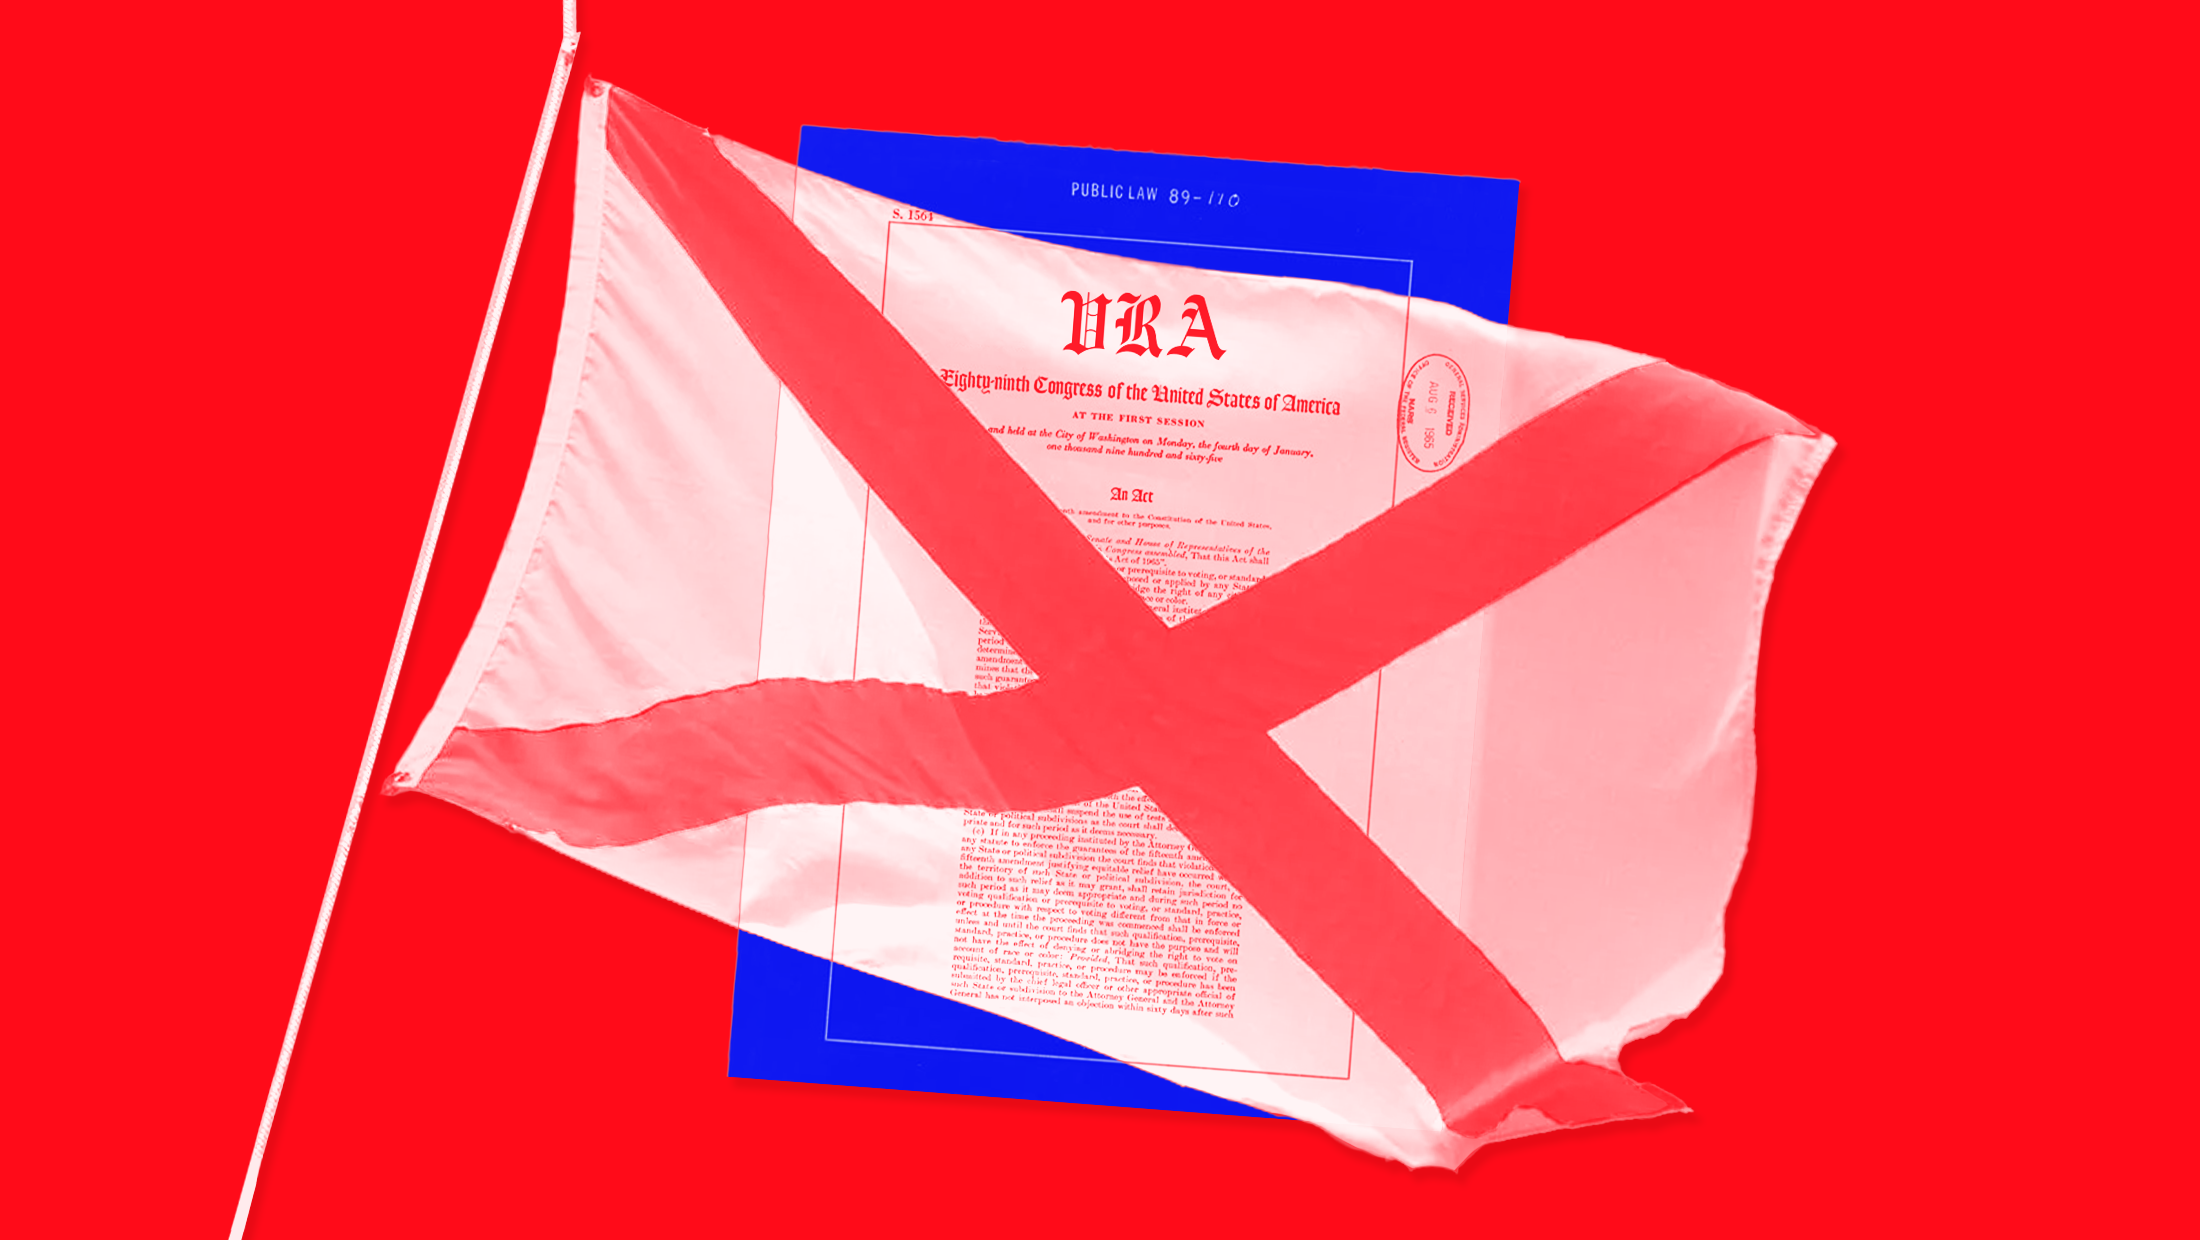 Red background with blue image of the Voting Rights Act with the red flag of the state of Alabama (with a big red "X") laid over the law document.